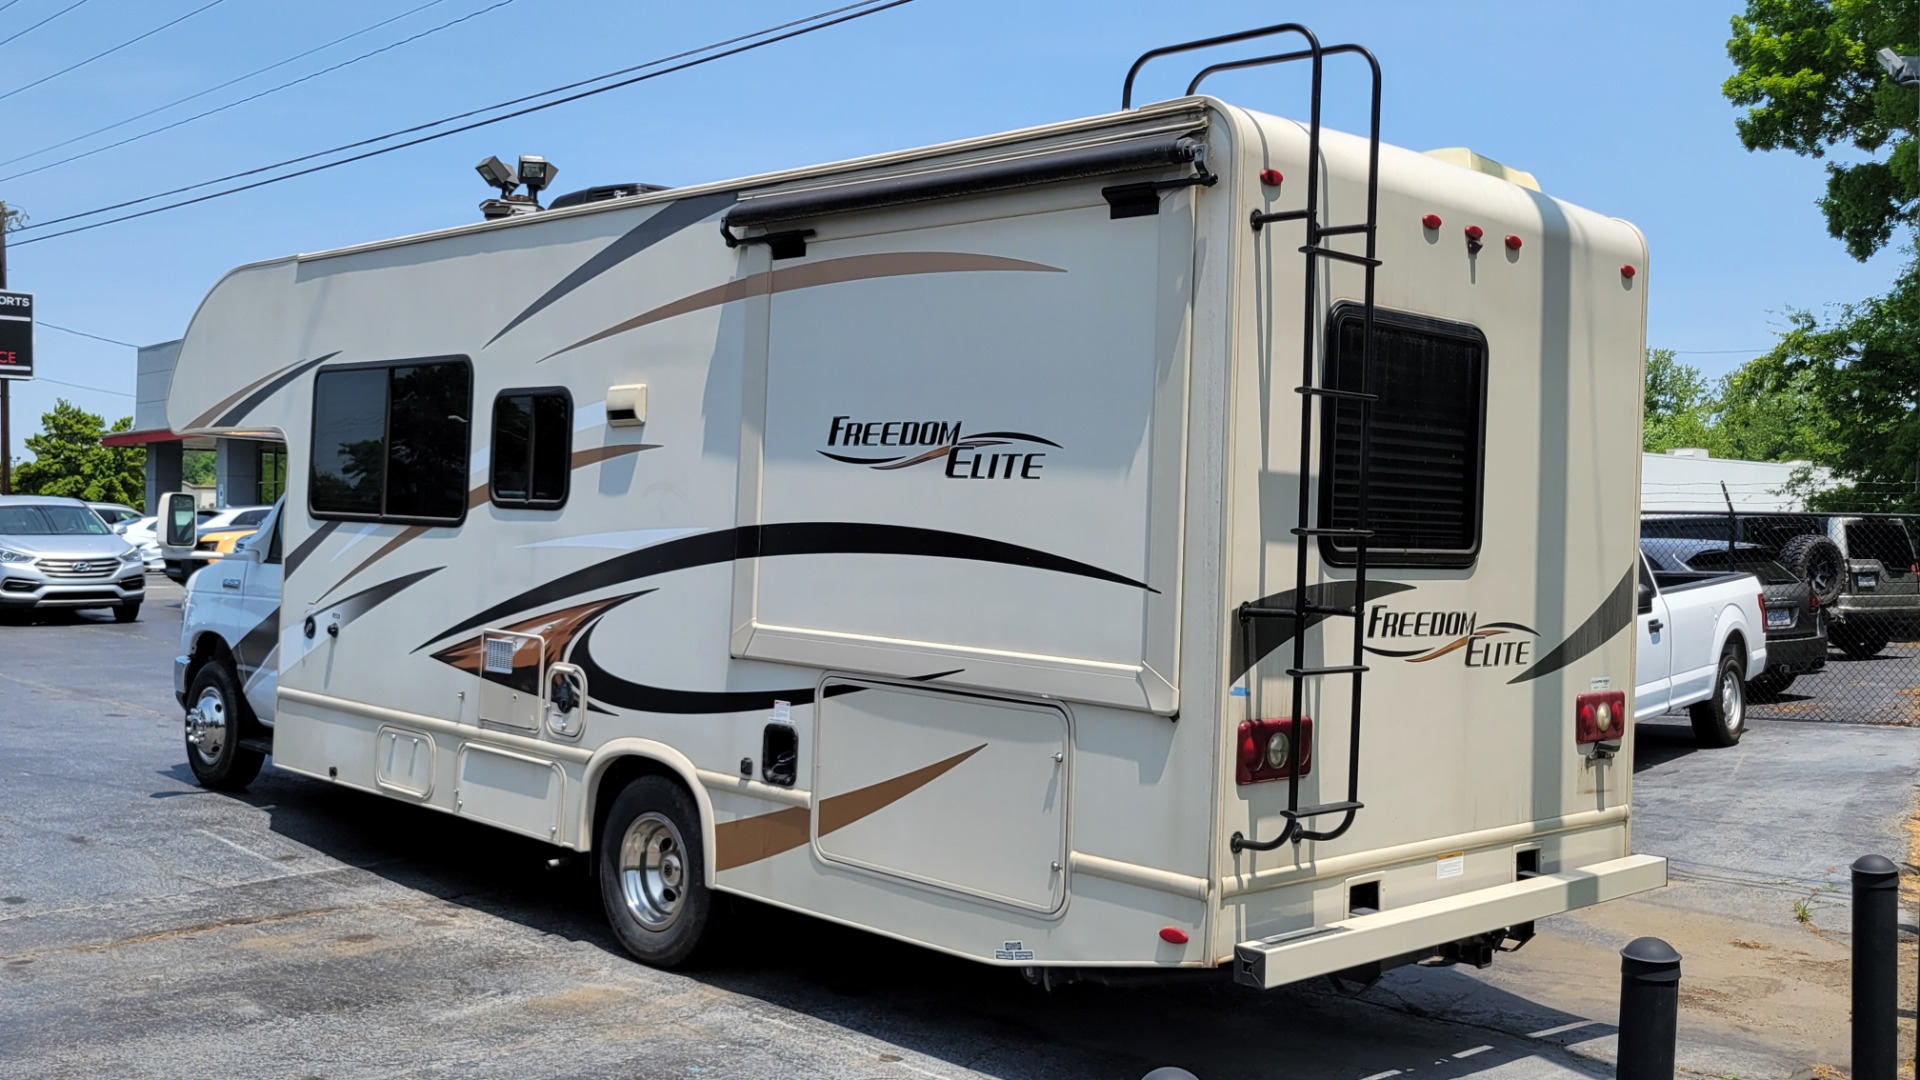 Used 2017 Ford E-SERIES CUTAWAY E-450 26H FREEDOM ELITE MOTORHOME / 6.8L V10 / ROOF LADDER for sale $74,999 at Formula Imports in Charlotte NC 28227 5